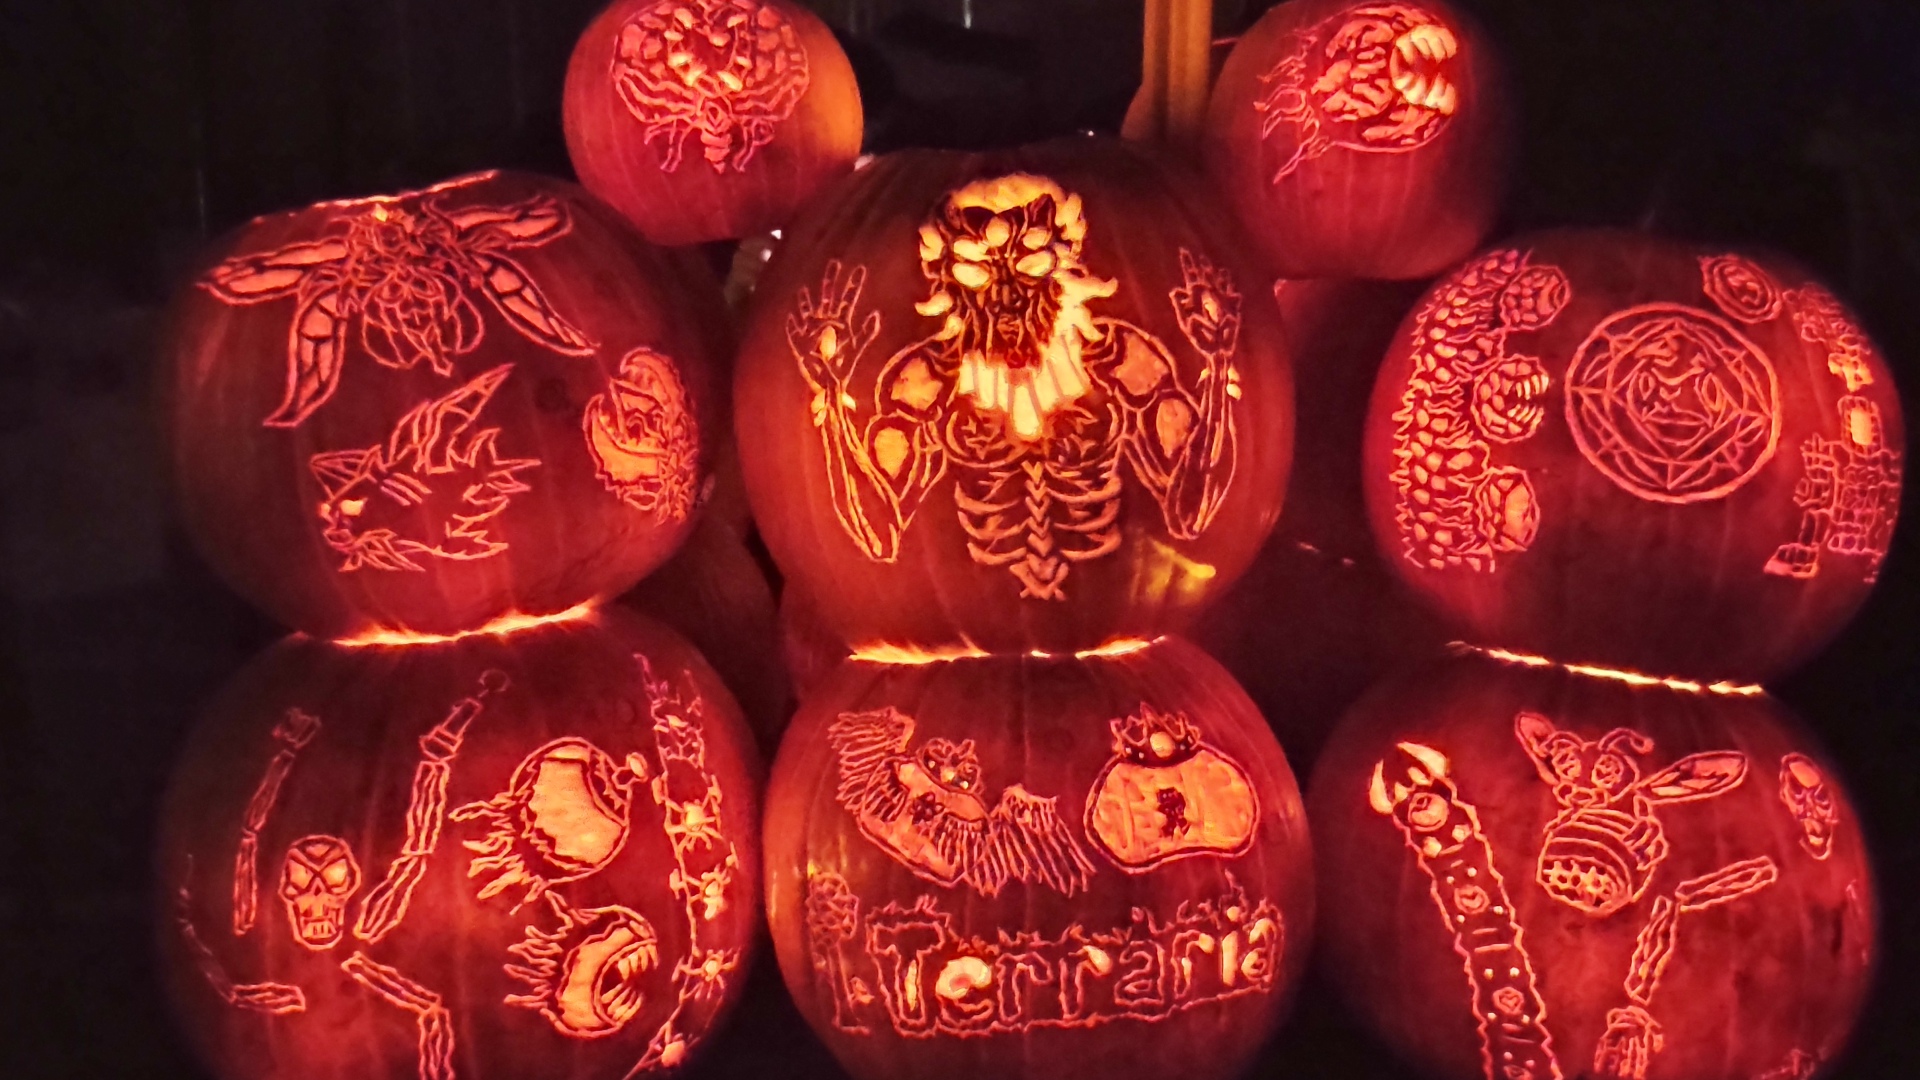 Terraria-themed carved pumpkins